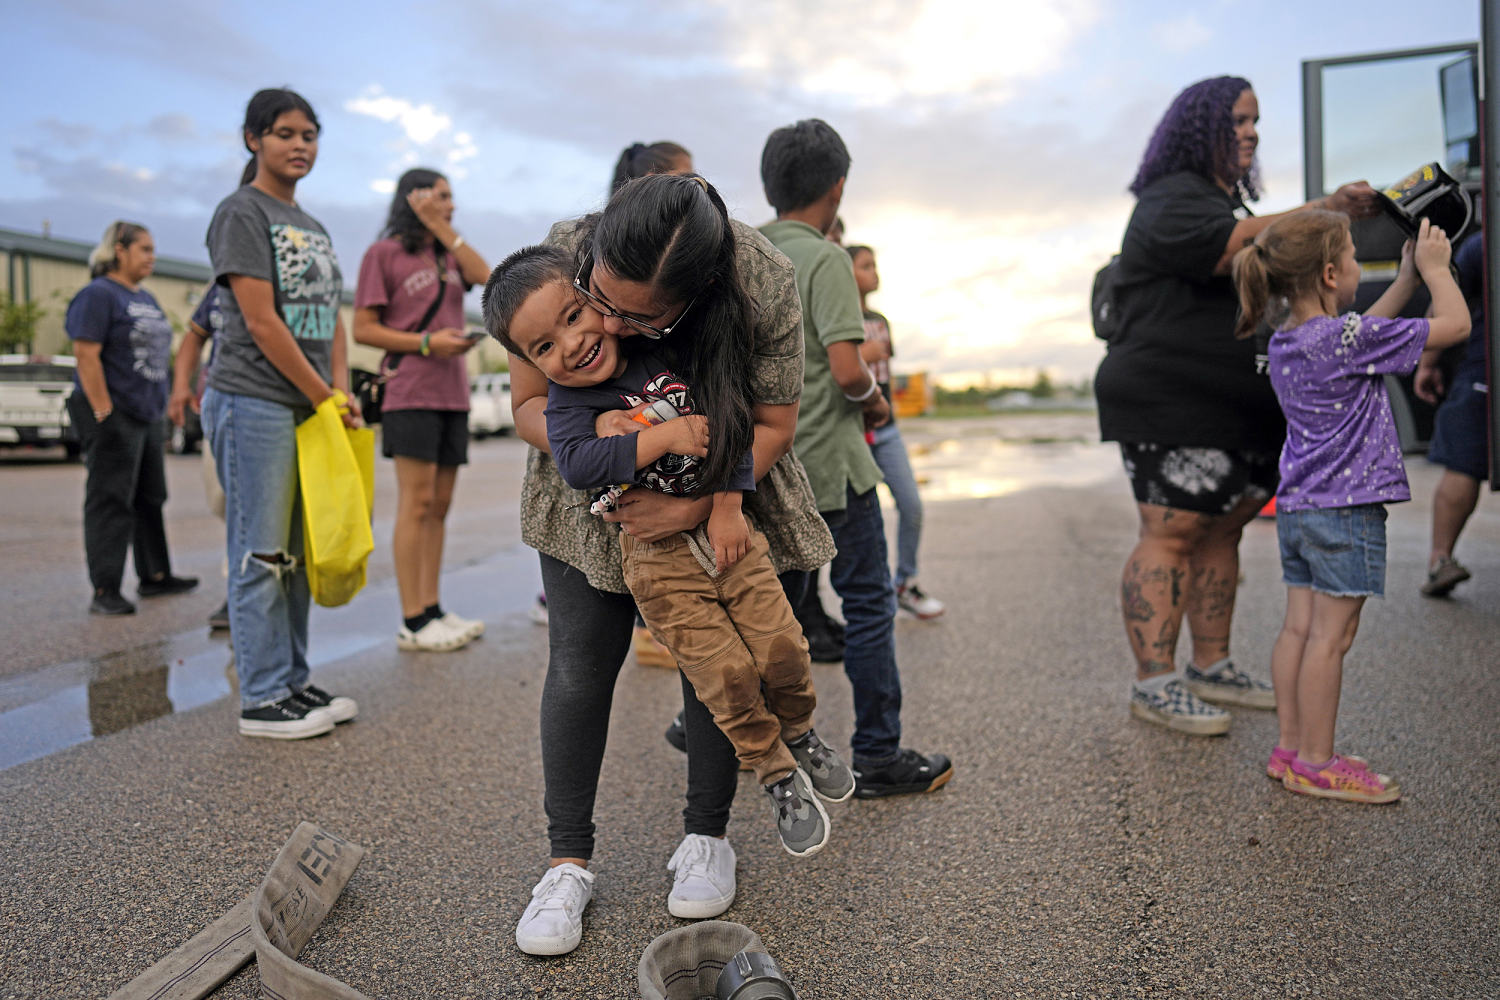 A Texas neighborhood targeted by the right over immigration pushes back